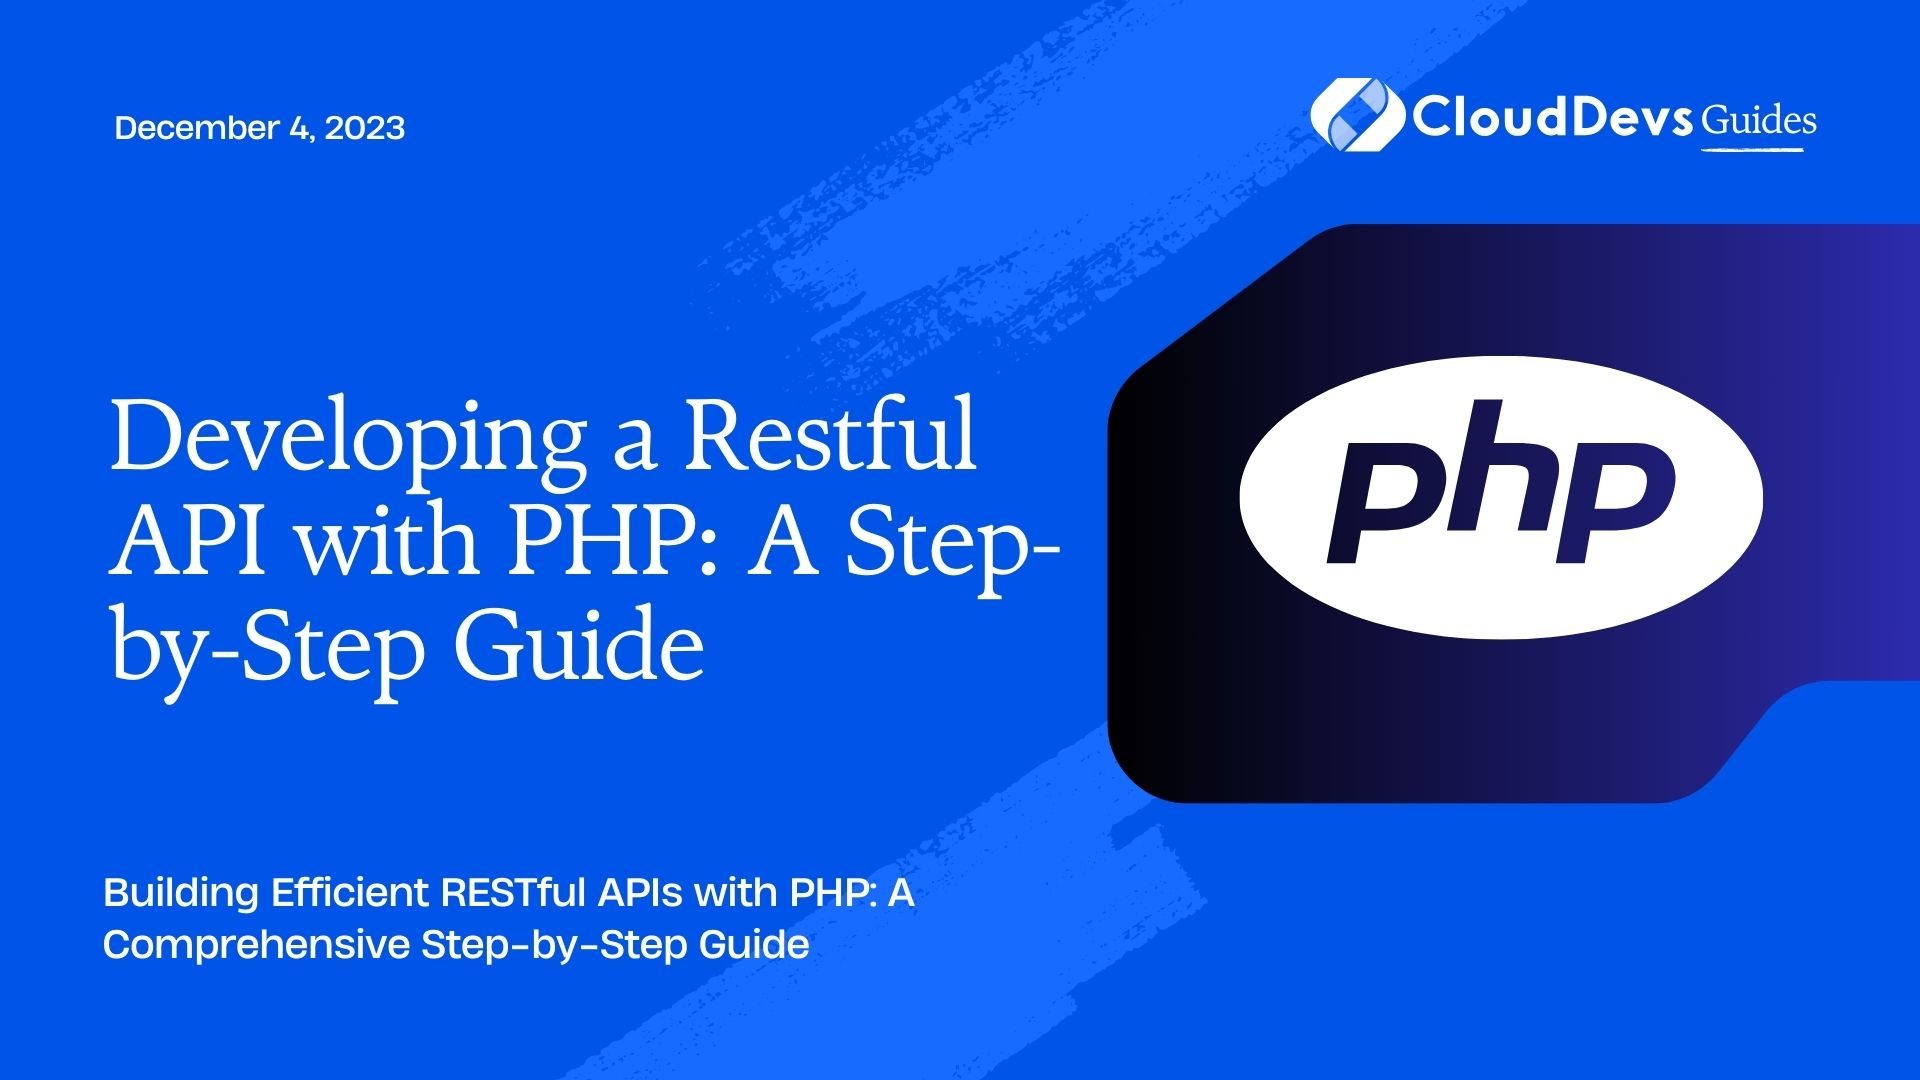 Developing a Restful API with PHP: A Step-by-Step Guide